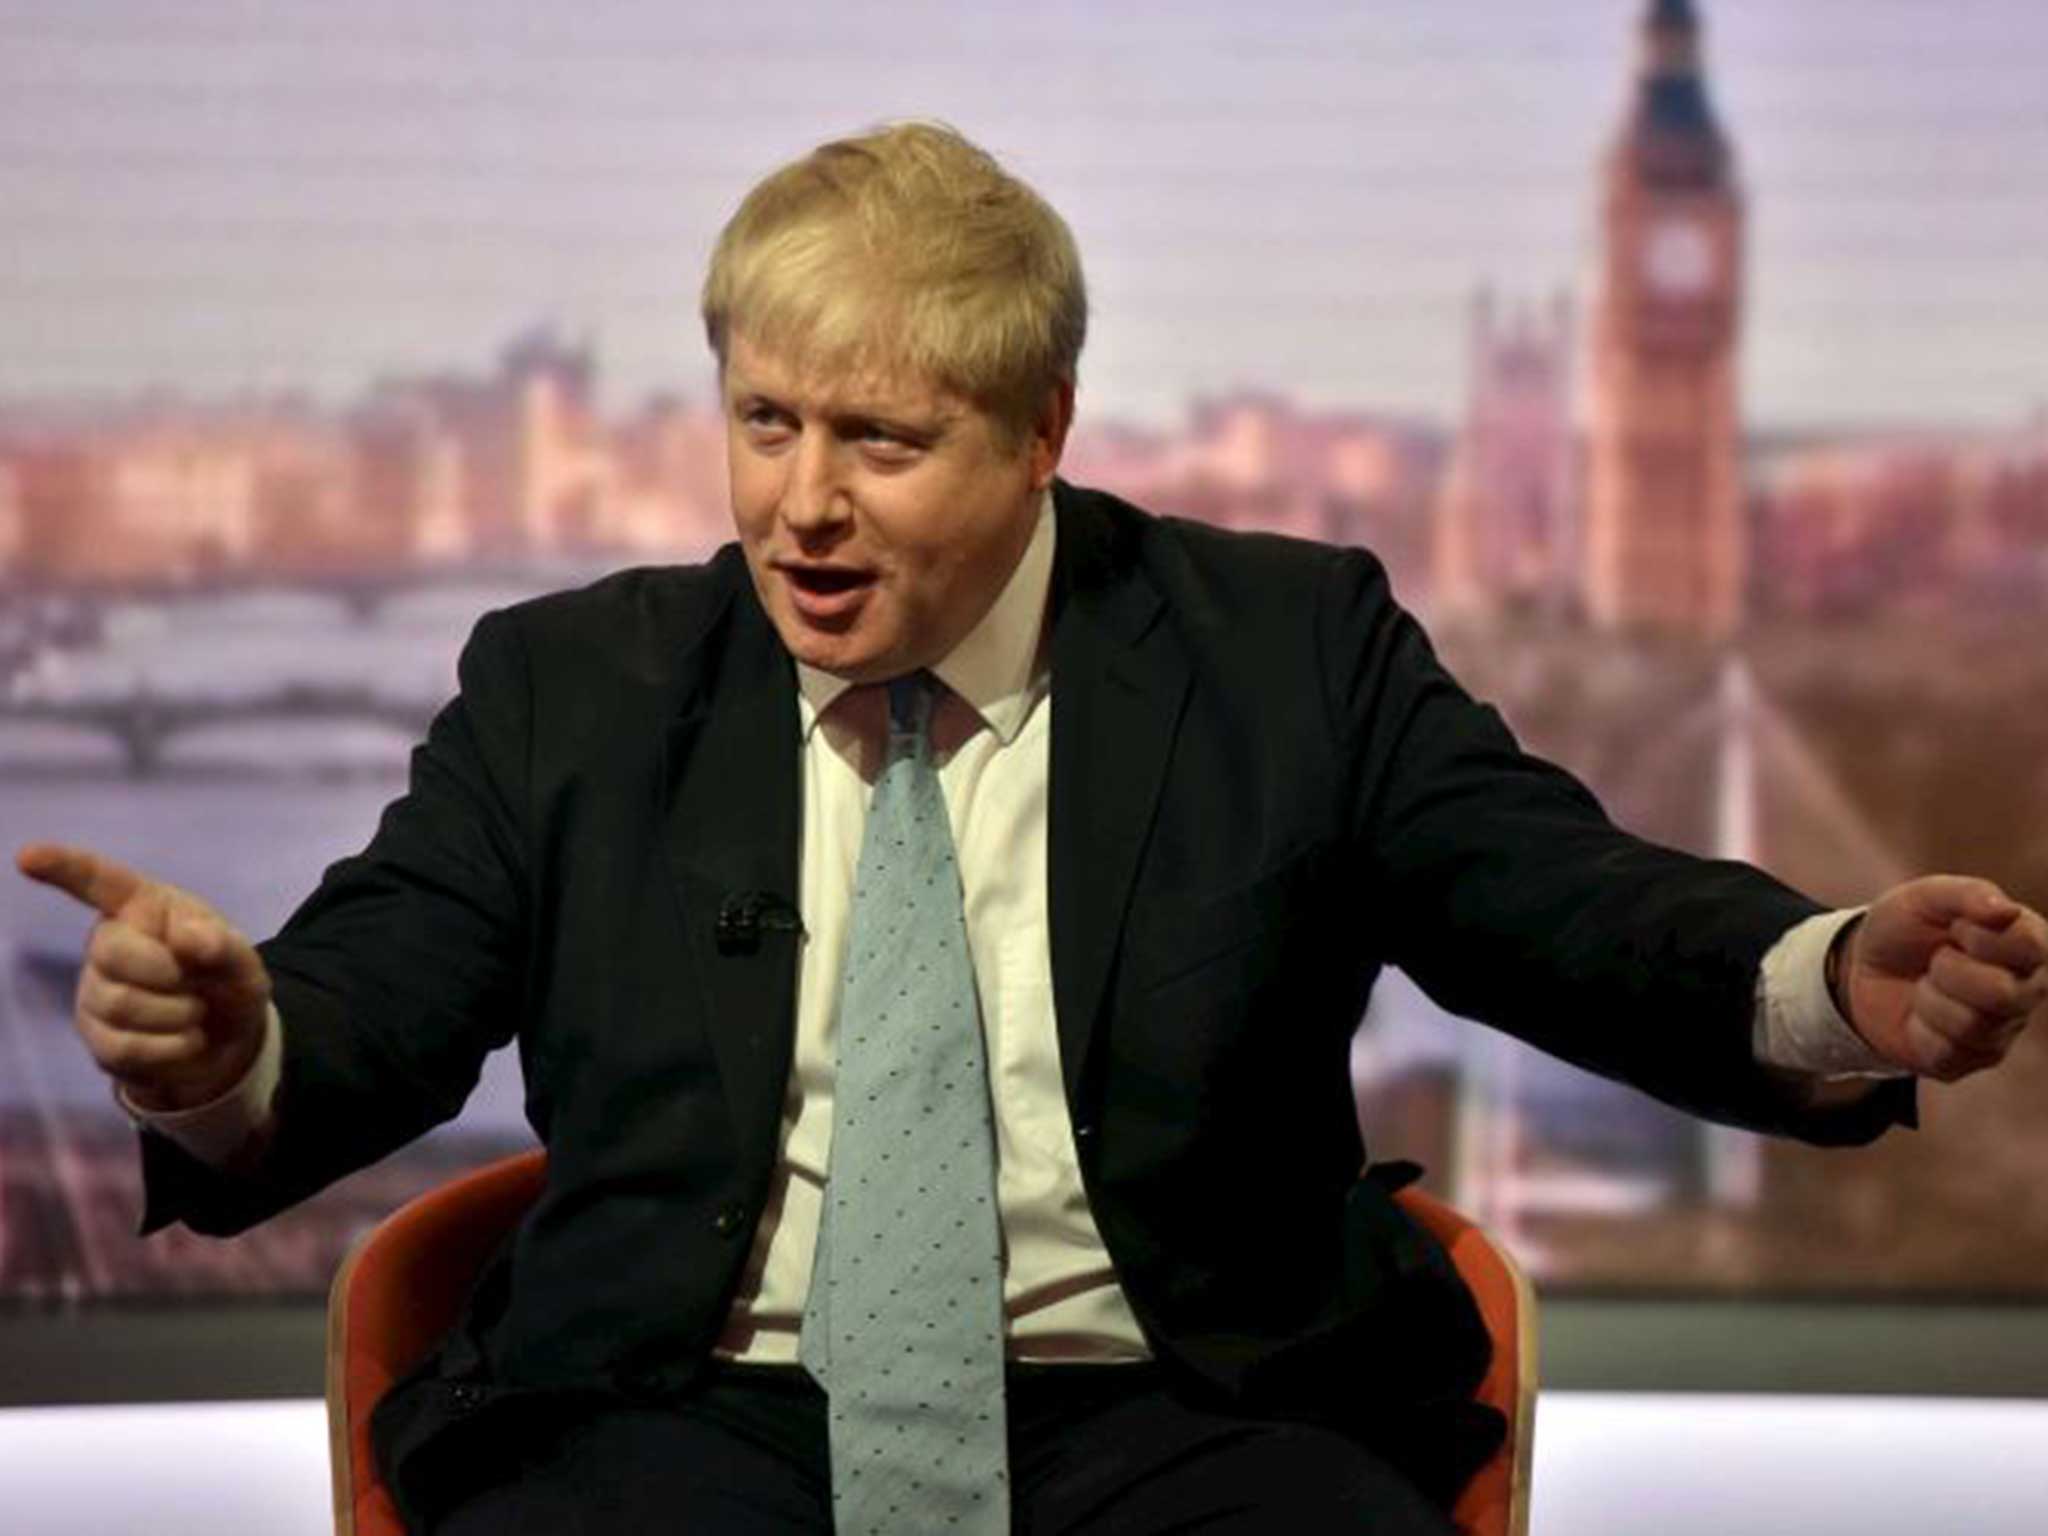 Boris Johnson on the Andrew Marr show, 6 March 2016